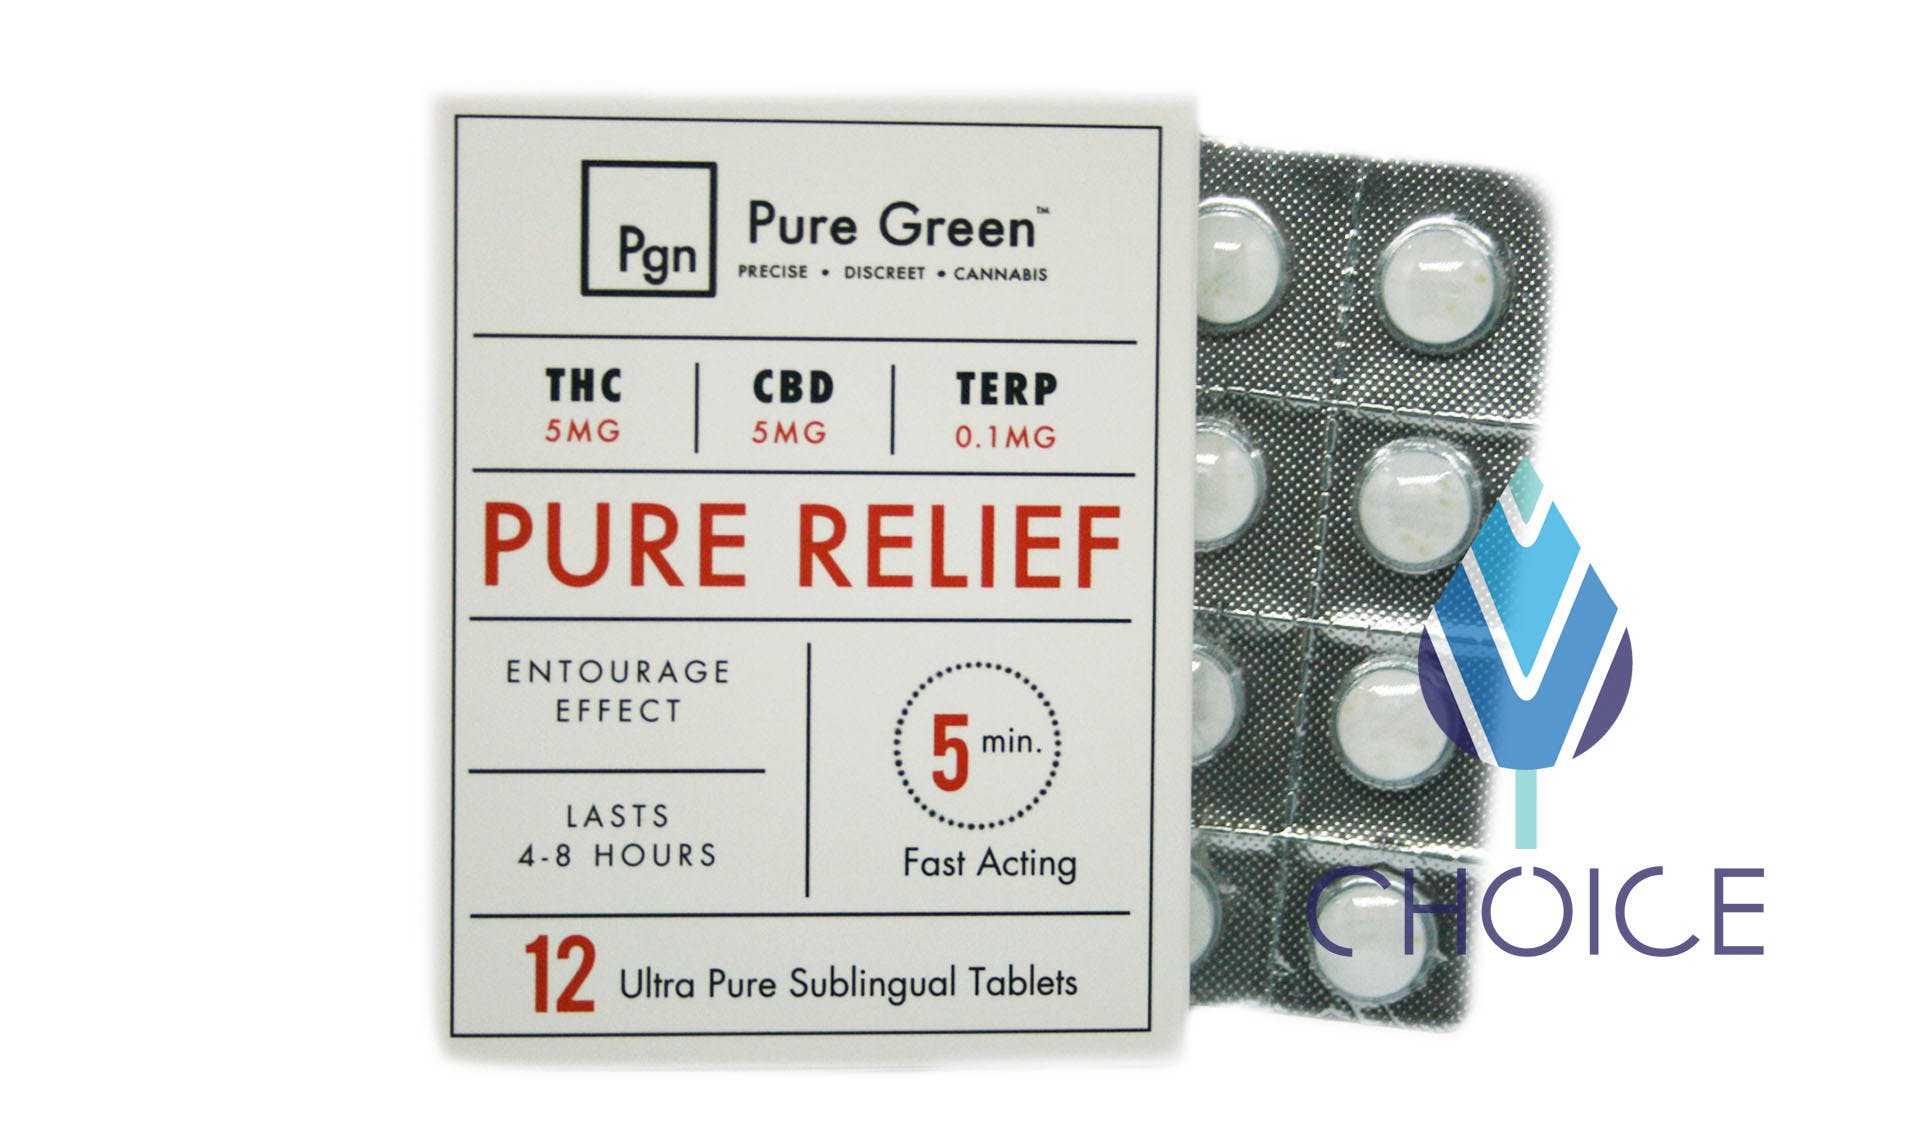 marijuana-dispensaries-choice-exit-145-in-jackson-12-pk-pure-relief-cbdthc-tablets-by-pure-green